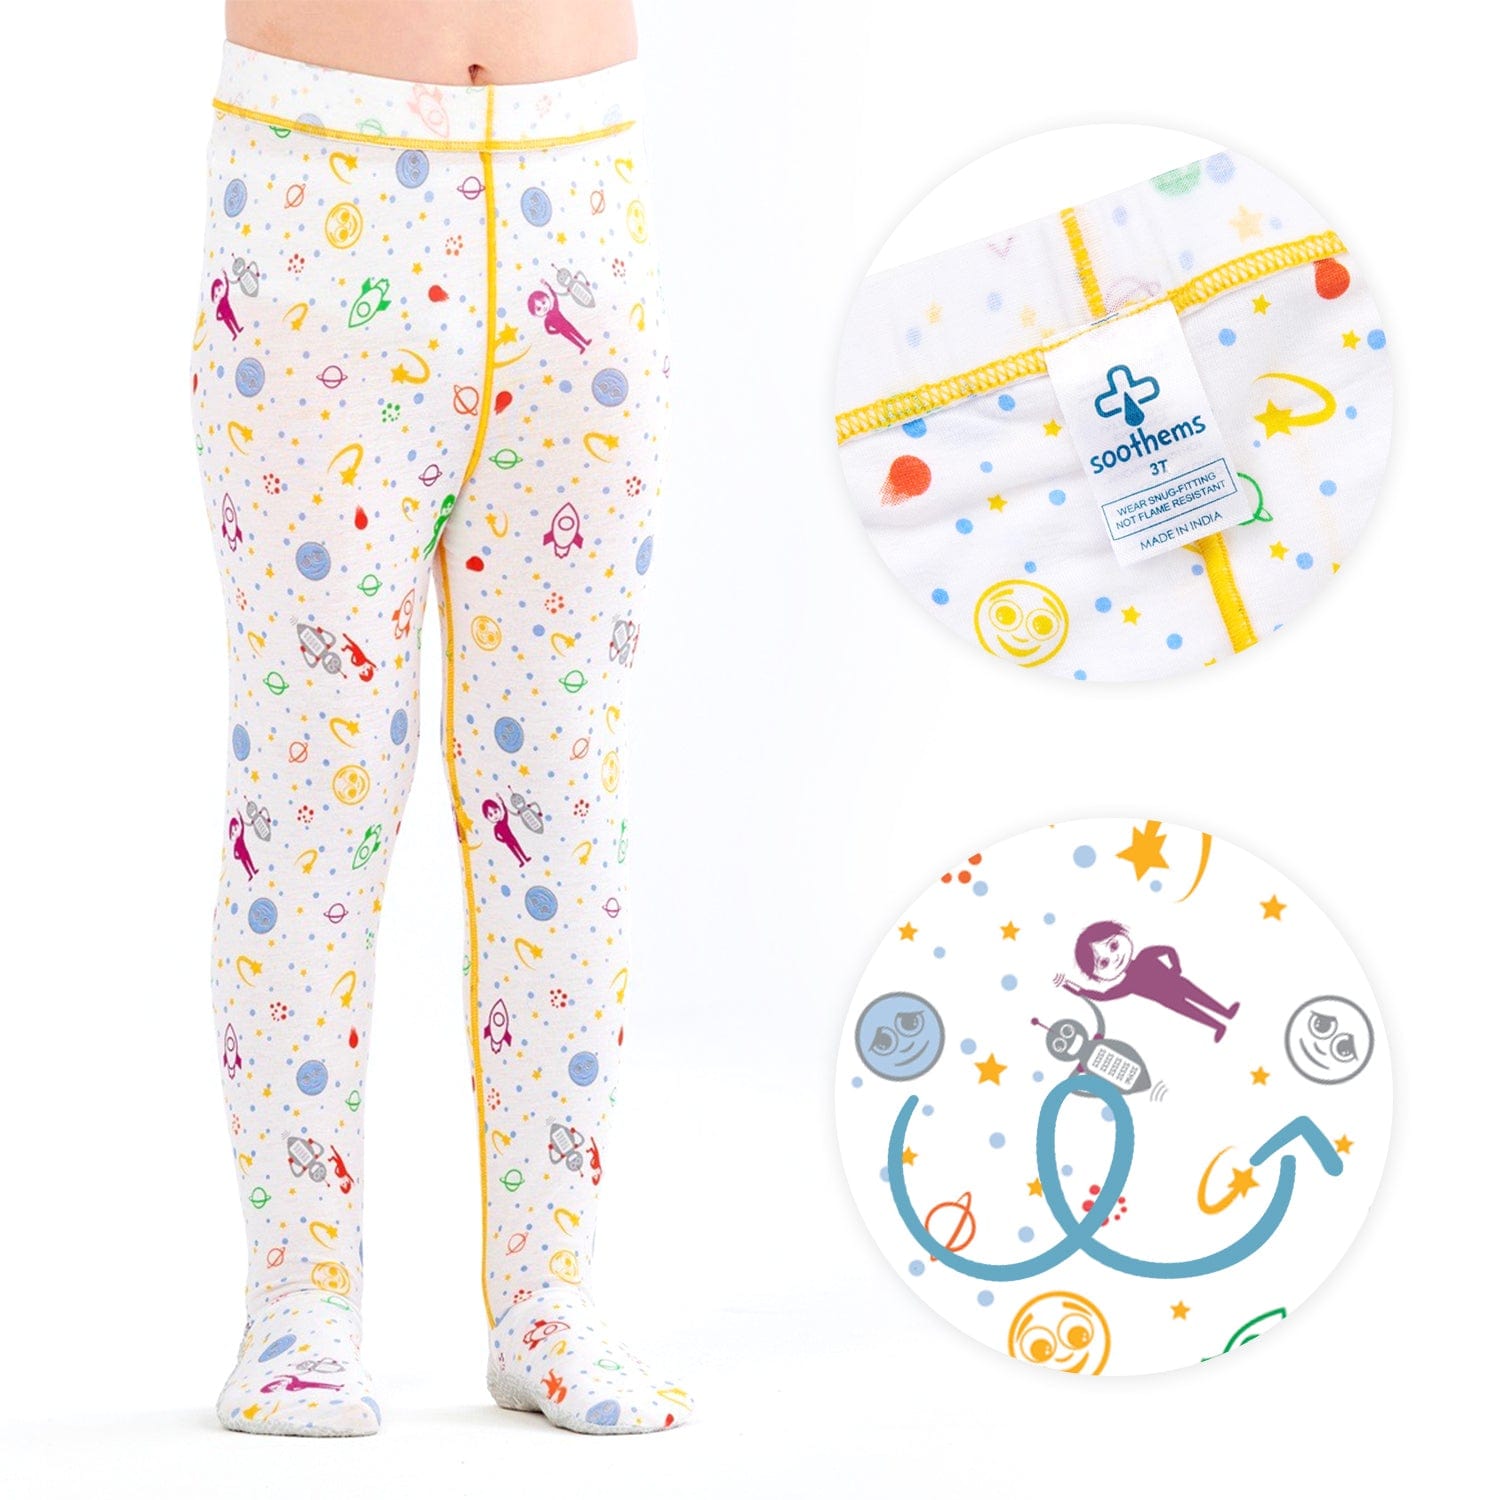 Soothems Eczema Pajama Pants for Kids Wet Wrap Therapy and Sensitive Skin | Soothems Itch Relief Bottoms 4 / White